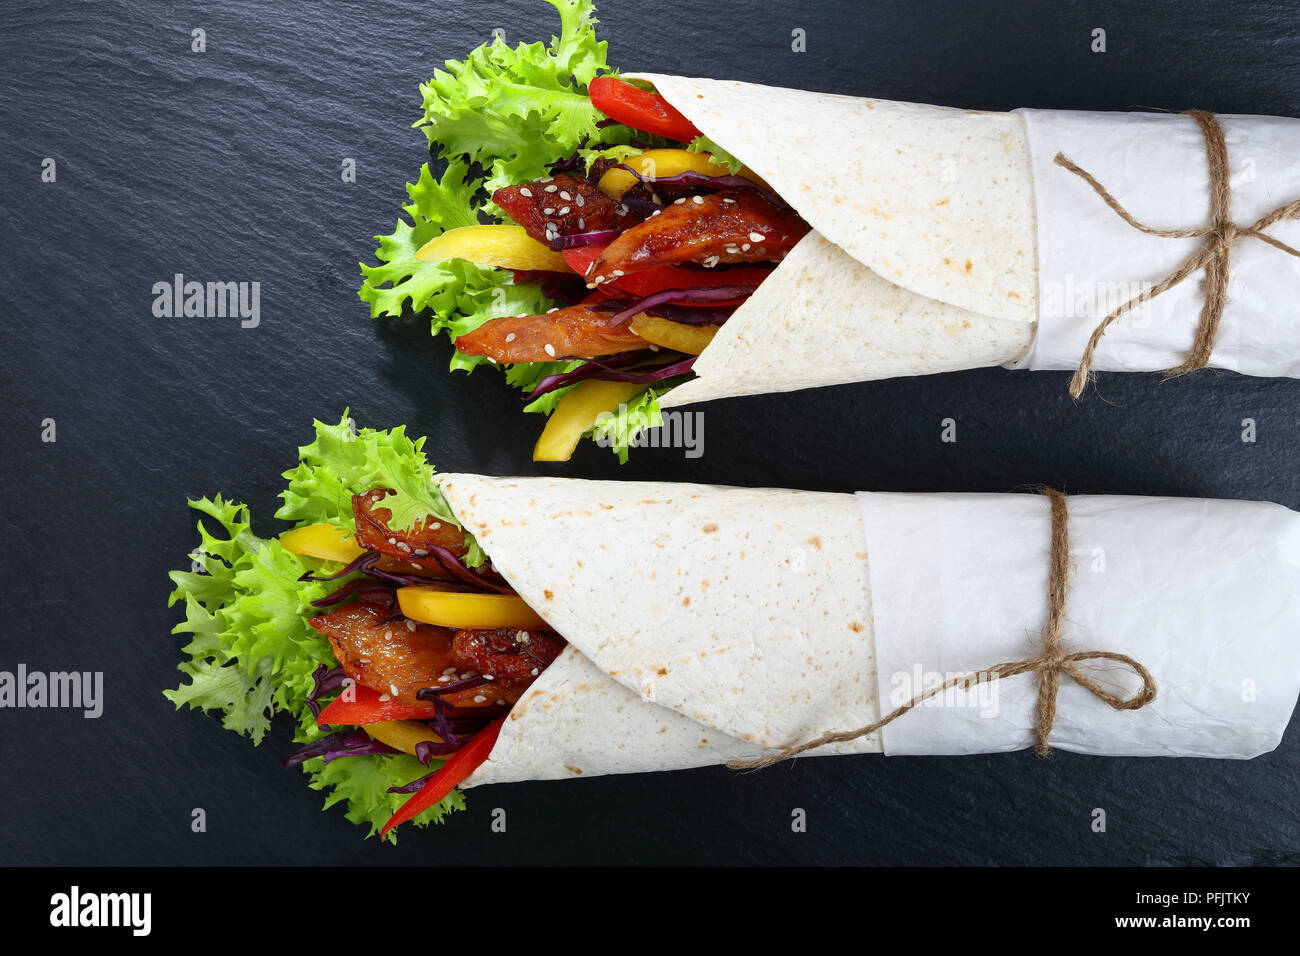 close-up of delicious fresh juicy flatbread sandwich wraps with frisee lettuce, sweet peppers, coleslaw and fried chicken meats on black stone tray, v Stock Photo